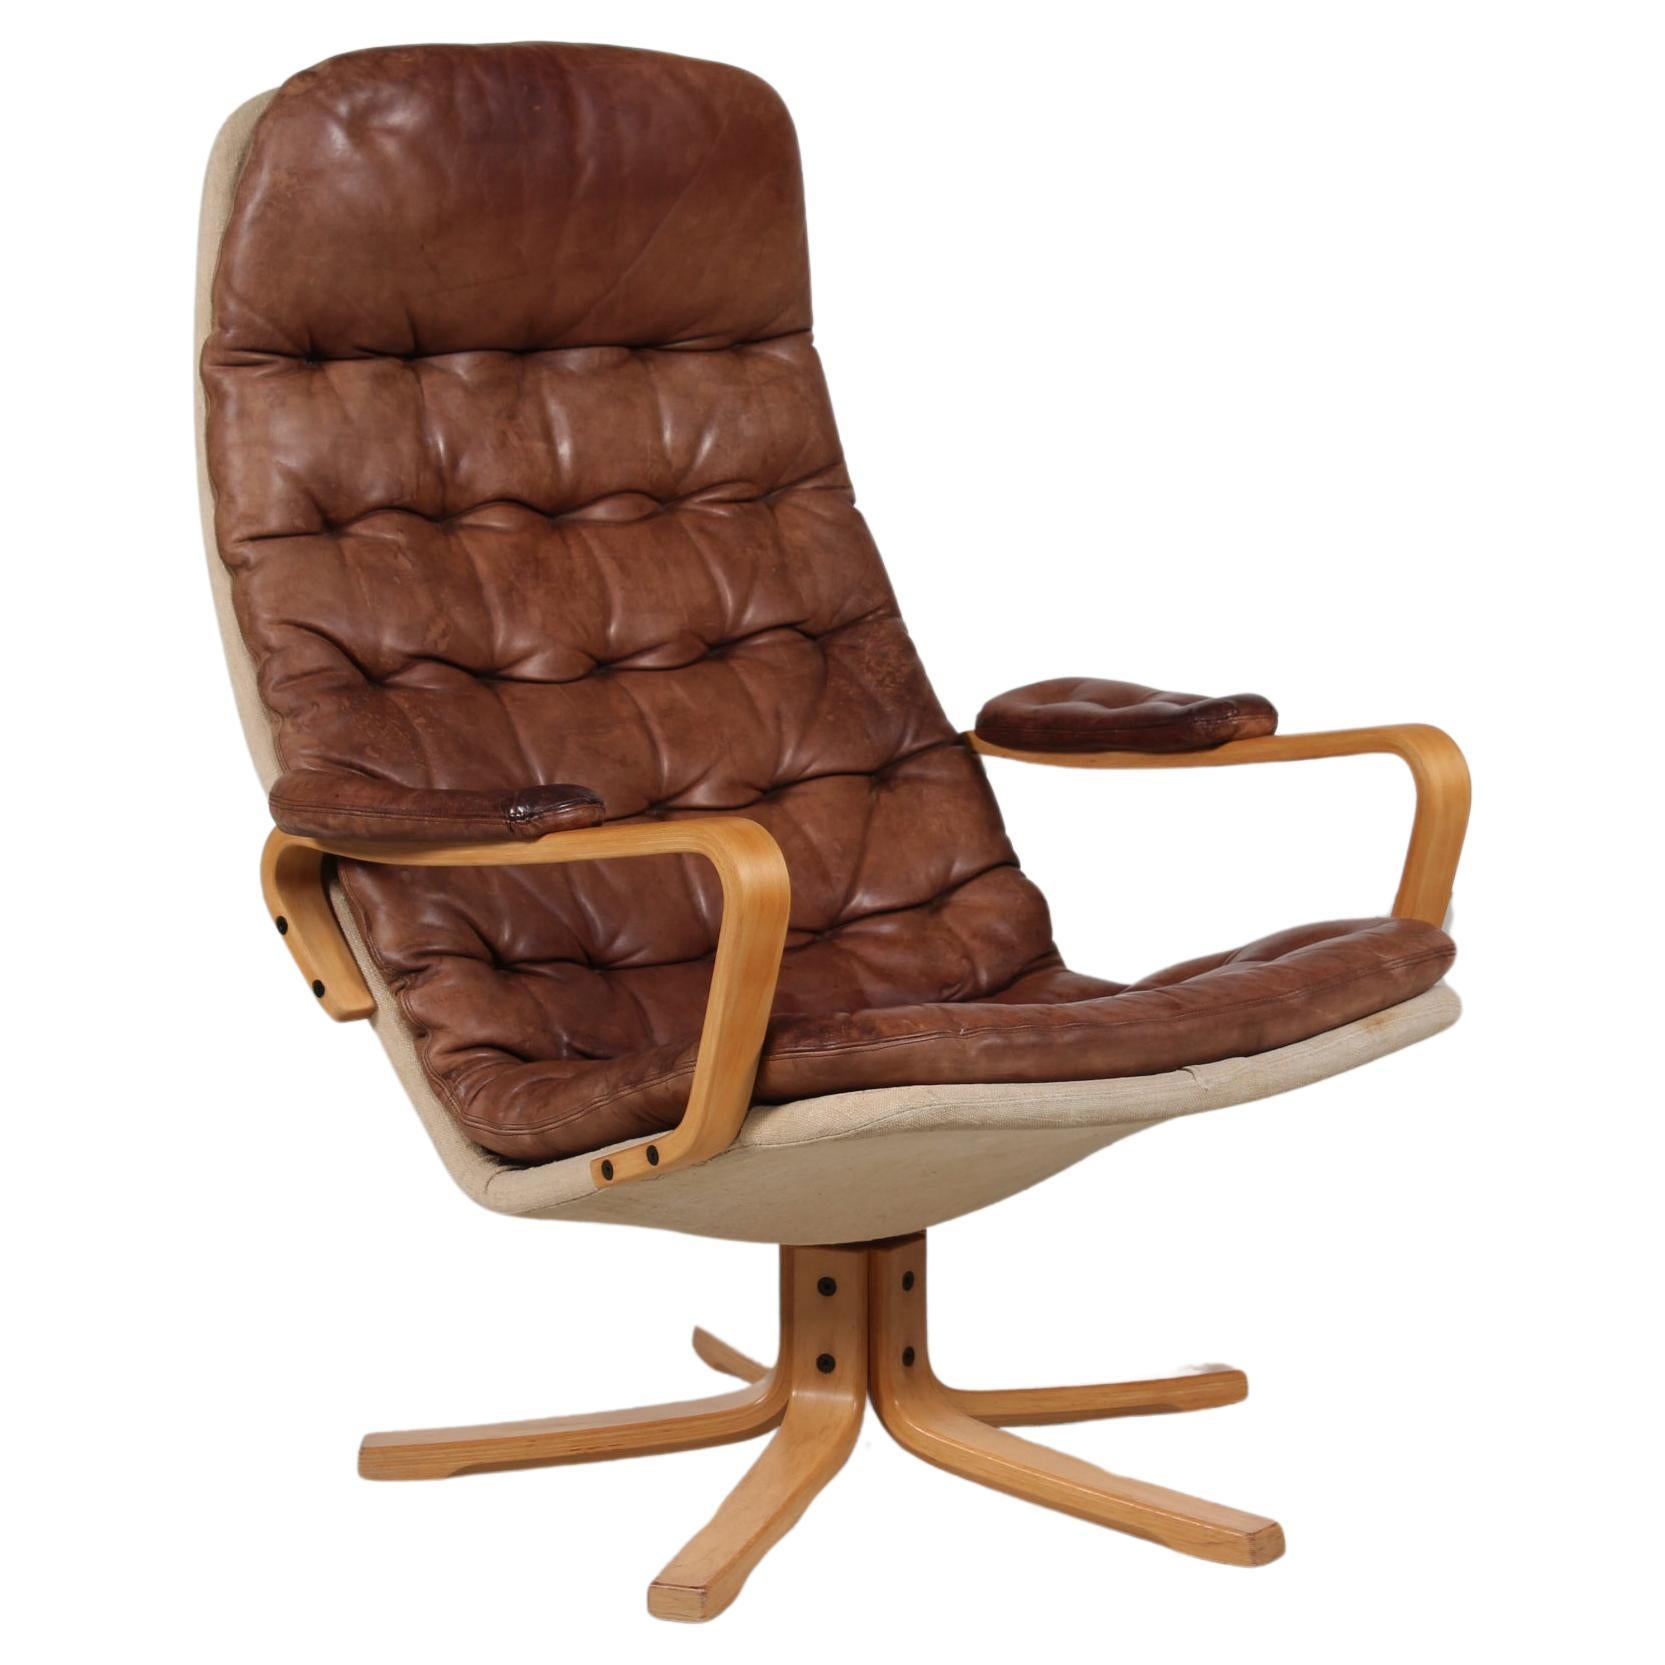 Swedish Sam Larsson Mona Roto Swivel Chair Beech and Cognac Colored Leather 1970 For Sale